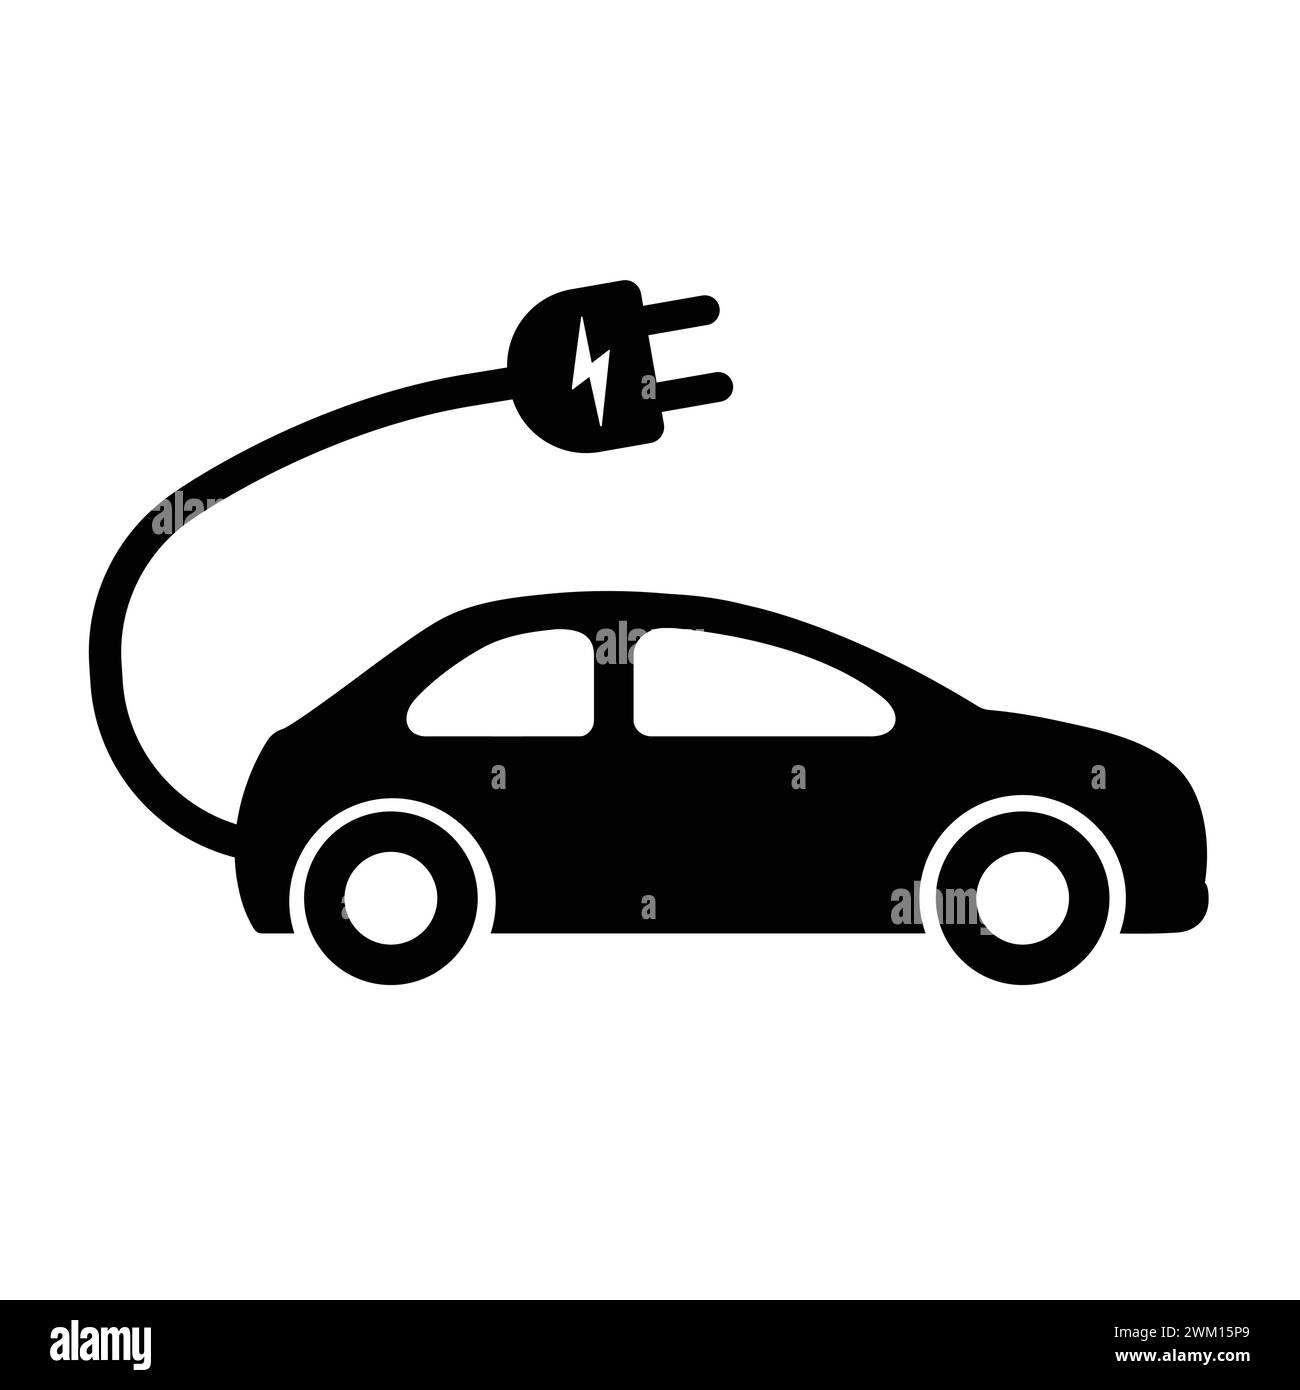 Electric Car Icon. Electric Vehicle With Plug Symbol. Eco-friendly Auto Vehicle. Eco Transport Icon. Electrical Charging Station Symbol Stock Vector